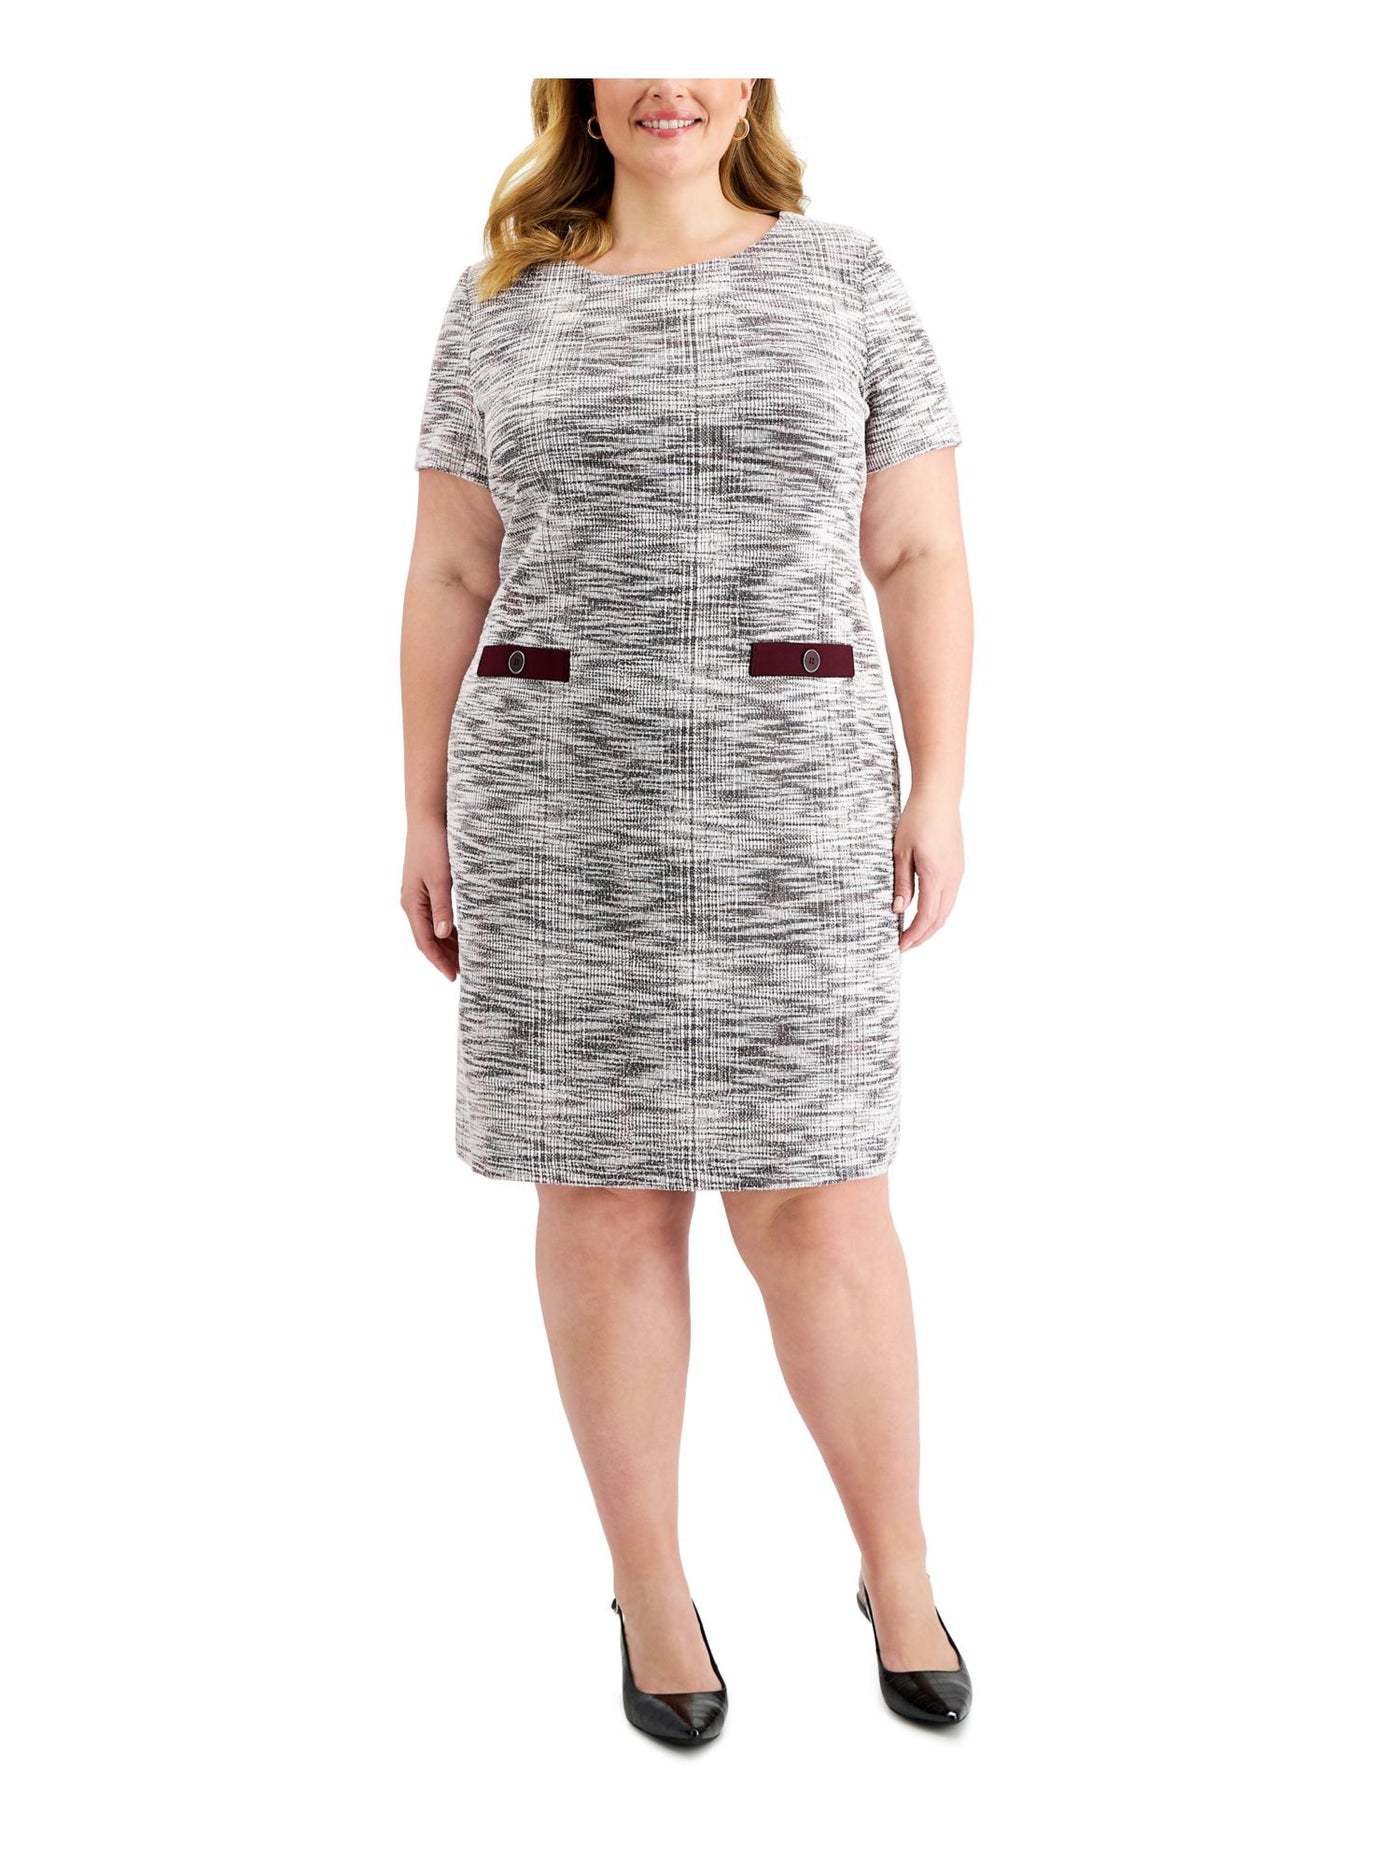 CONNECTED APPAREL Womens Gray Heather Short Sleeve Jewel Neck Above The Knee Shift Dress Plus 18W